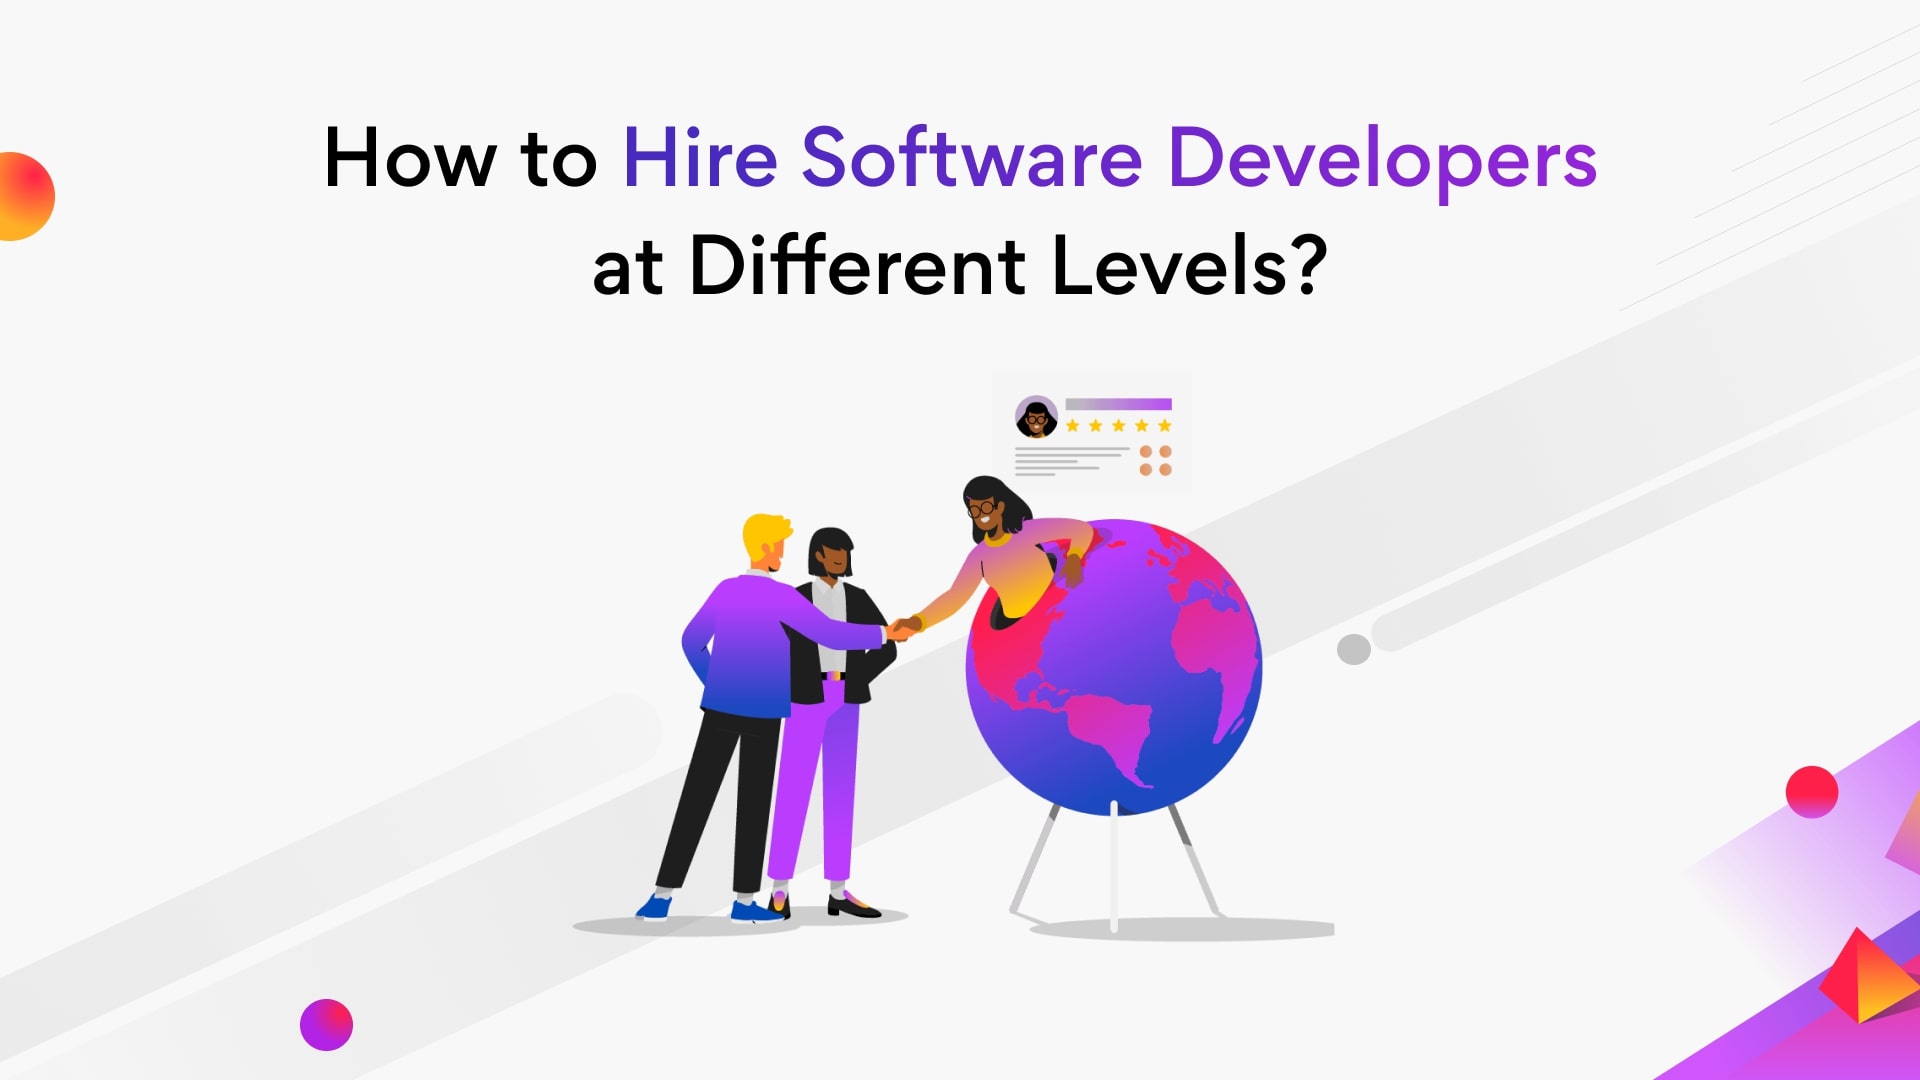 Hiring Software Developers at Different Levels